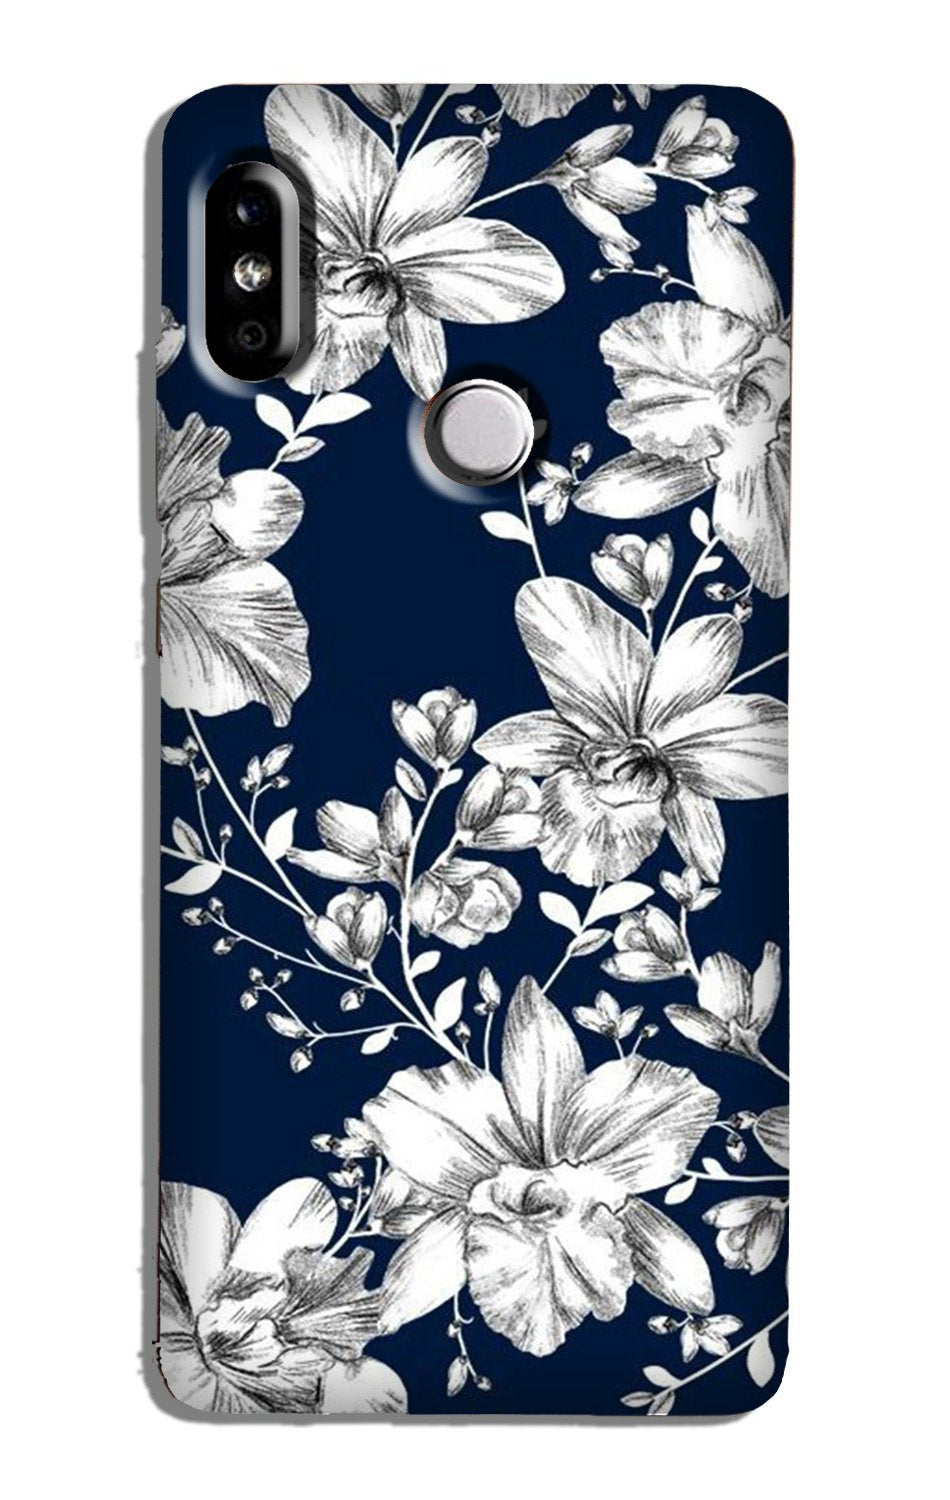 White flowers Blue Background Case for Redmi Note 5 Pro